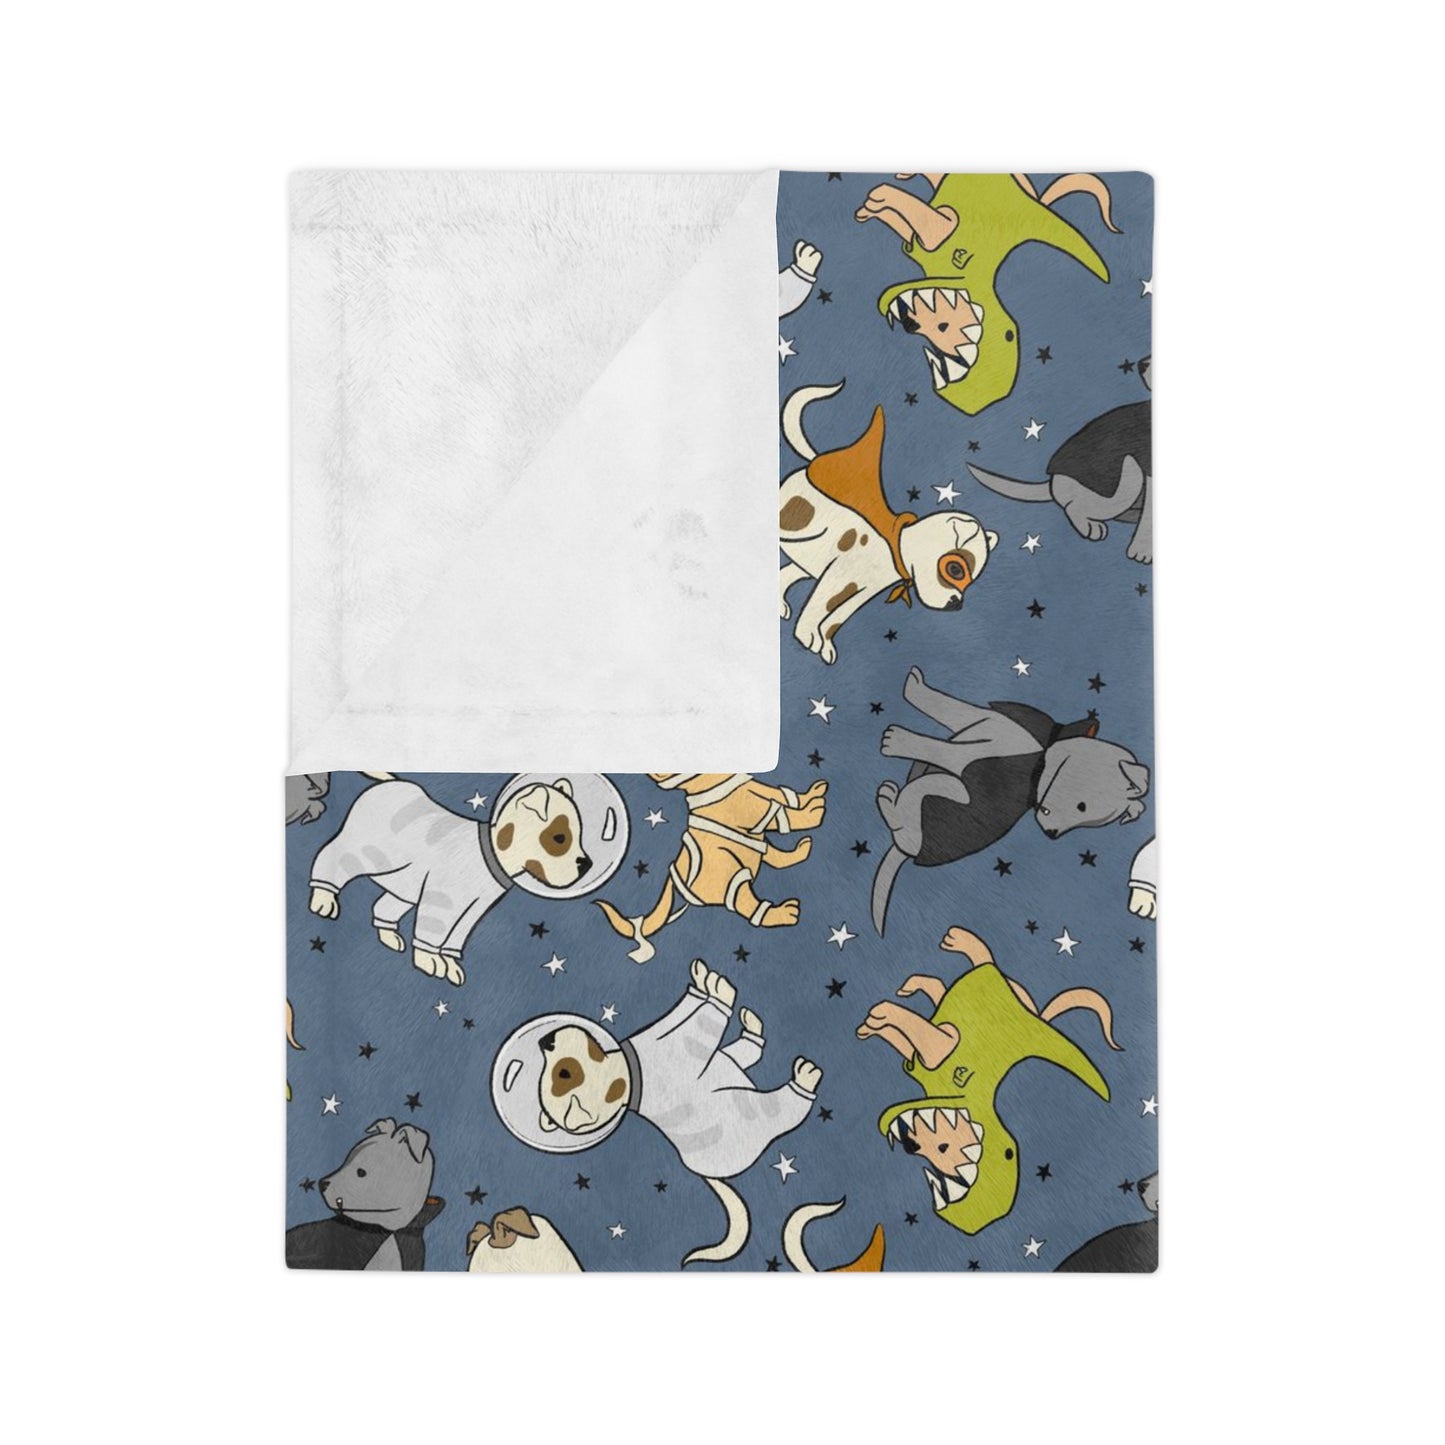 Dogs with Halloween costumes Velveteen Minky Blanket for dog lovers and Halloween lovers.